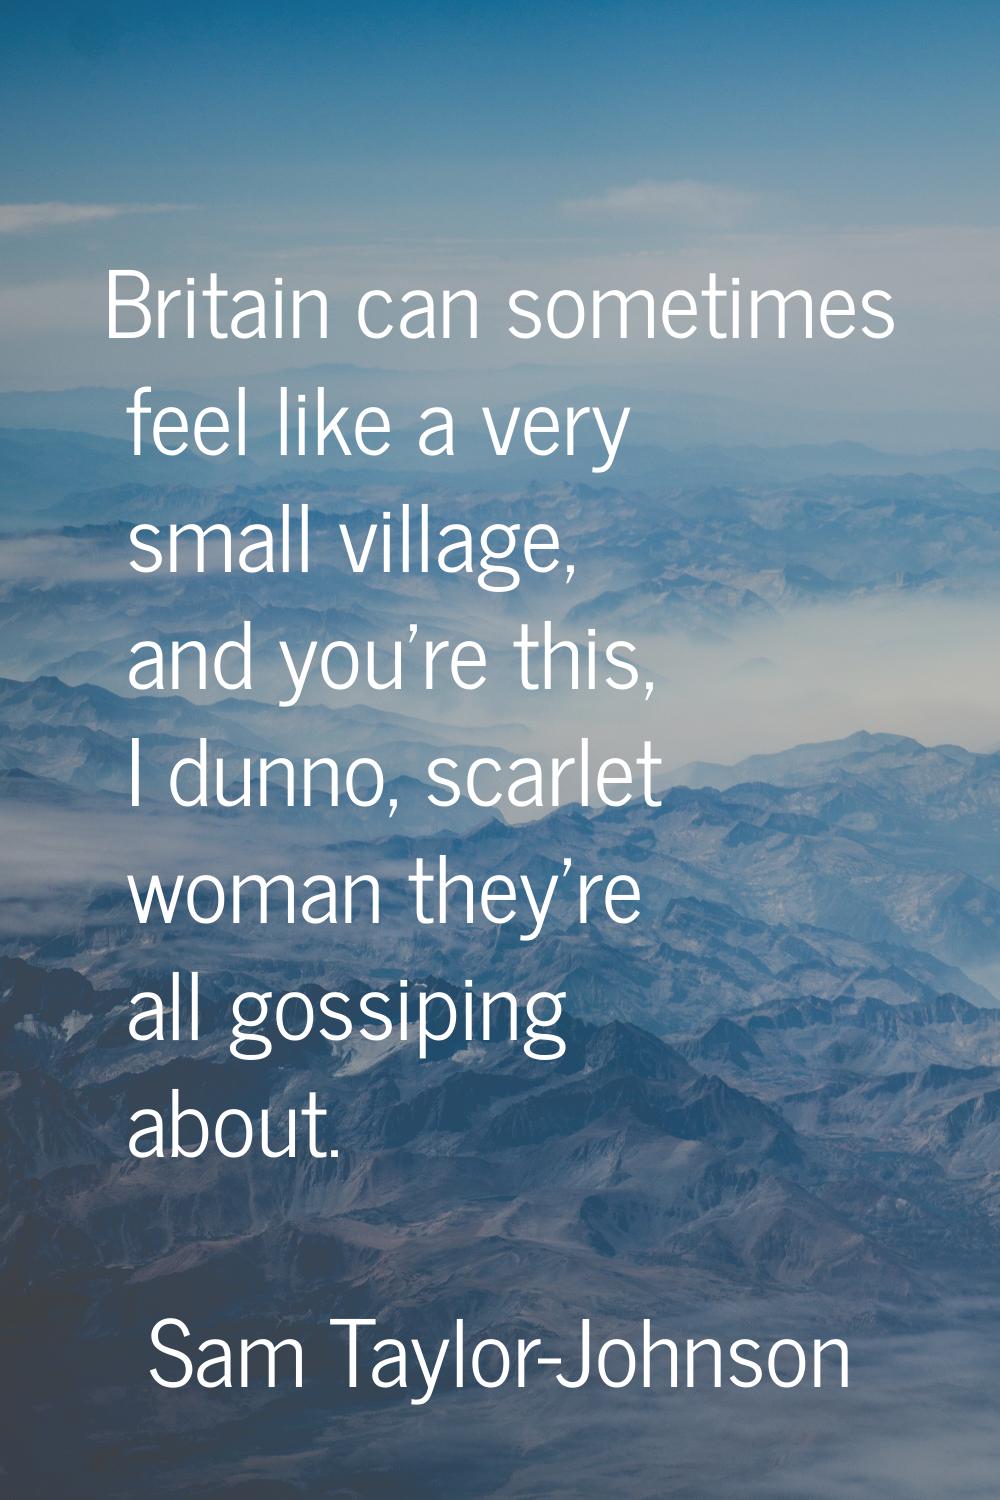 Britain can sometimes feel like a very small village, and you're this, I dunno, scarlet woman they'